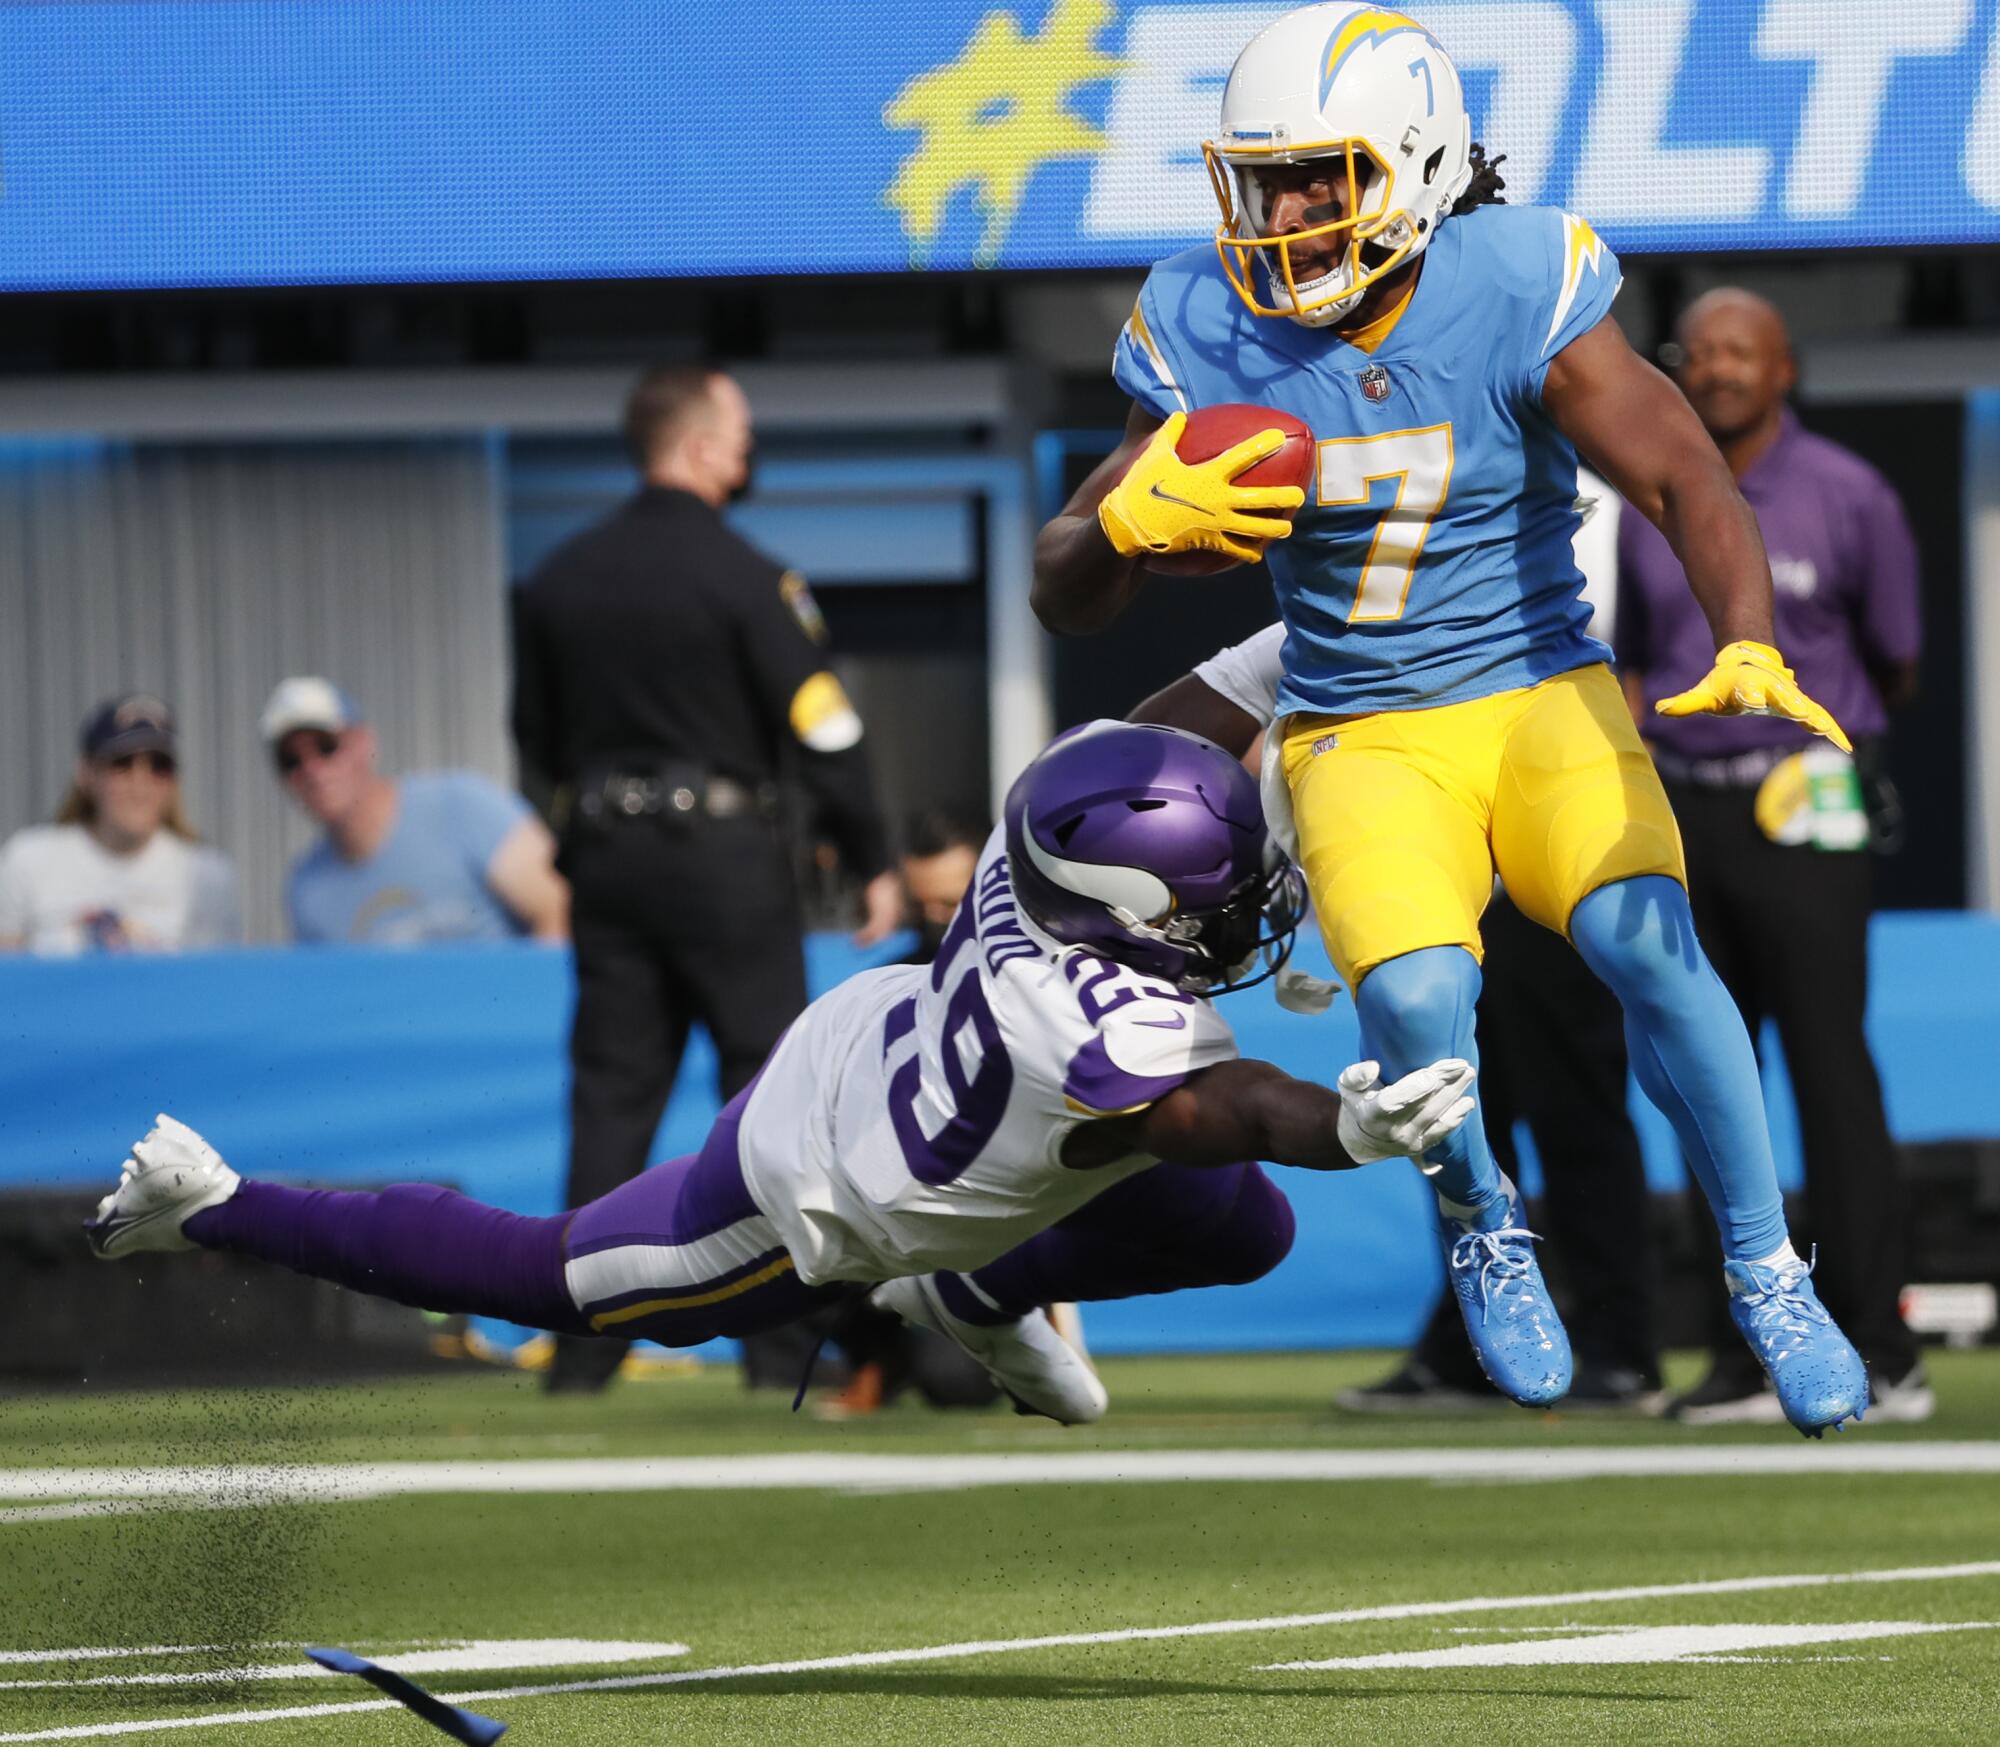 Chargers wide receiver Andre Roberts leaps to avoid the tackle of Minnesota Vikings defensive back Kris Boyd.